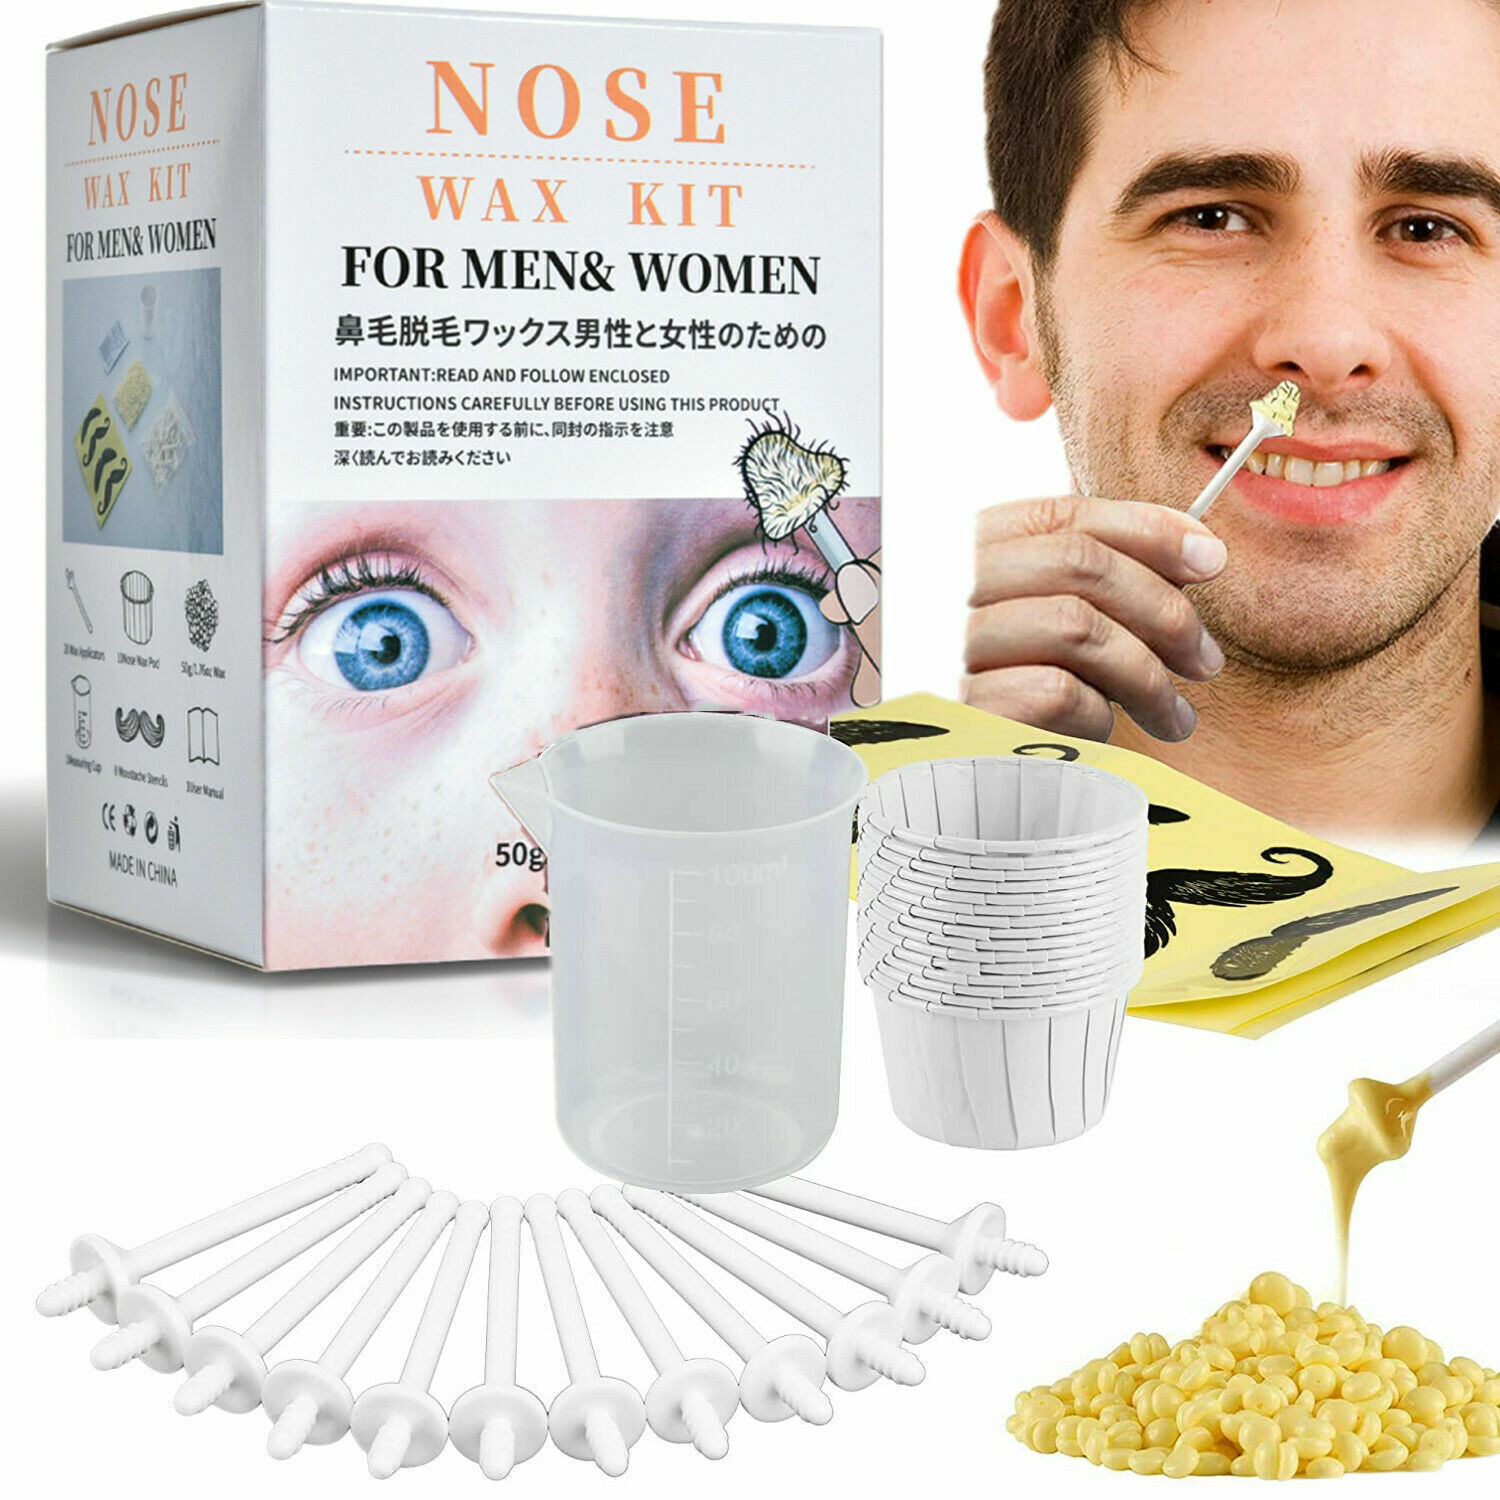 Nose & Ear Hair Removal Waxing Kit